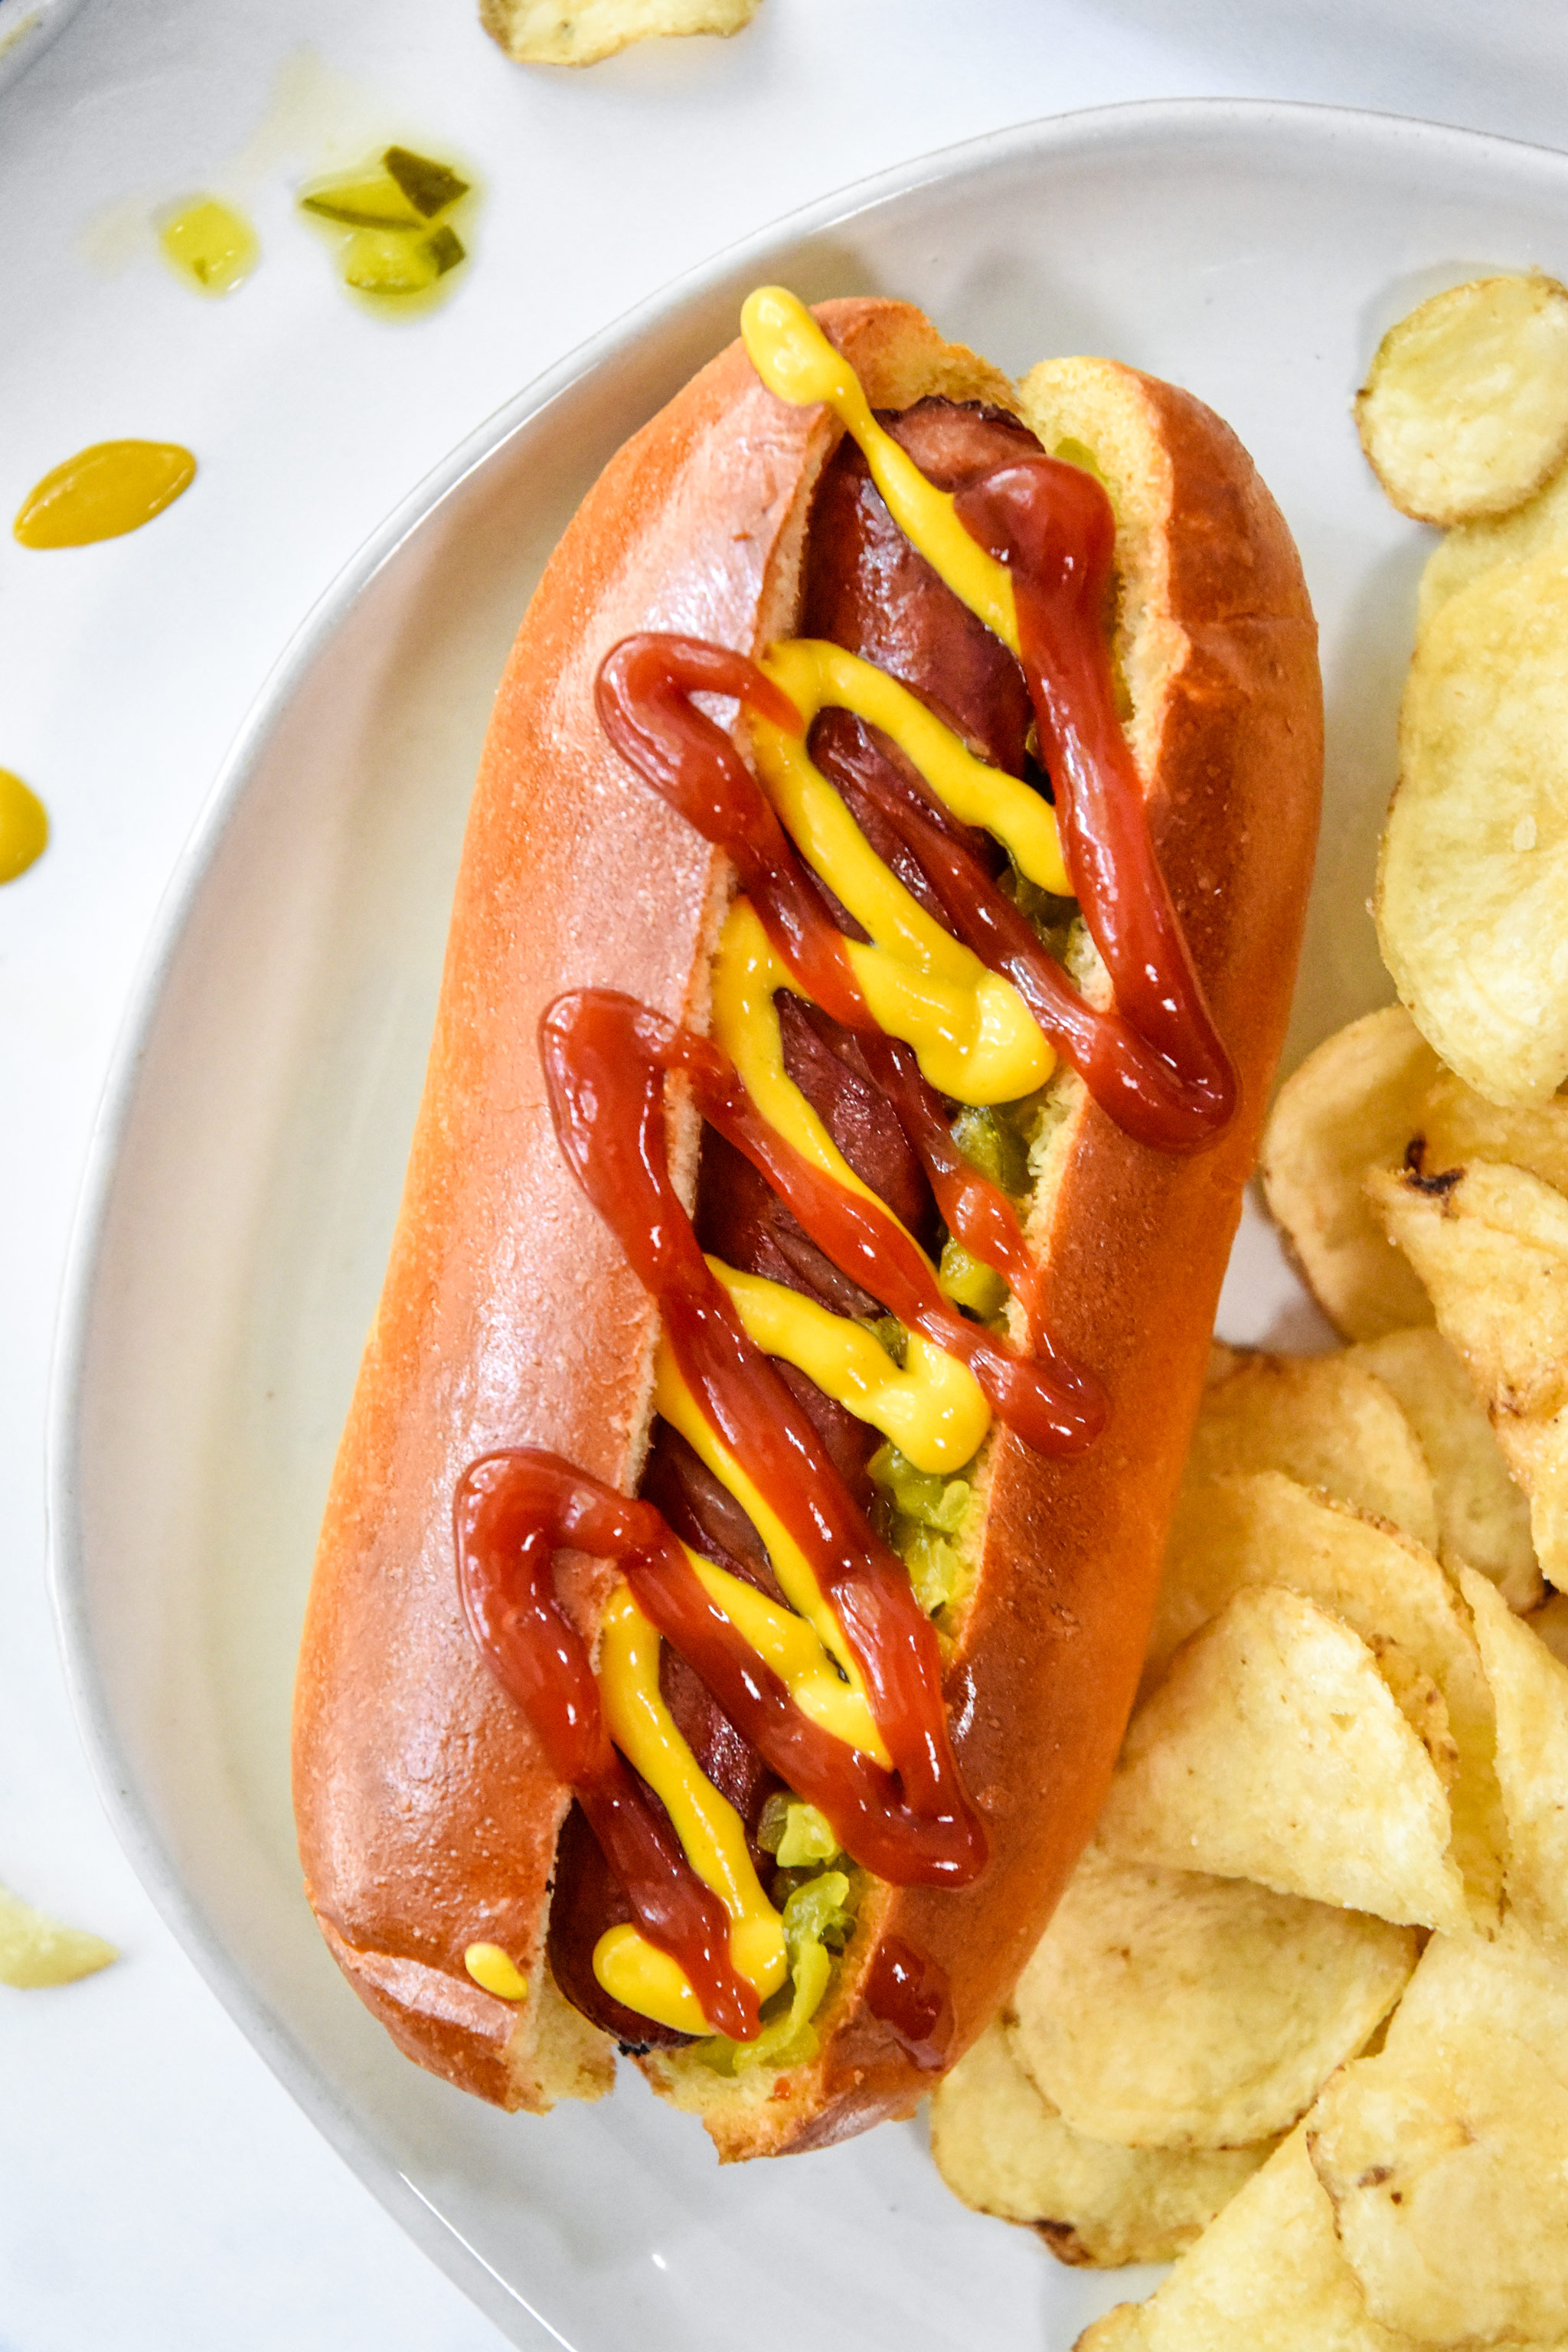 air fryer hot dog in a bun with mustard and ketchup, chips on the side.